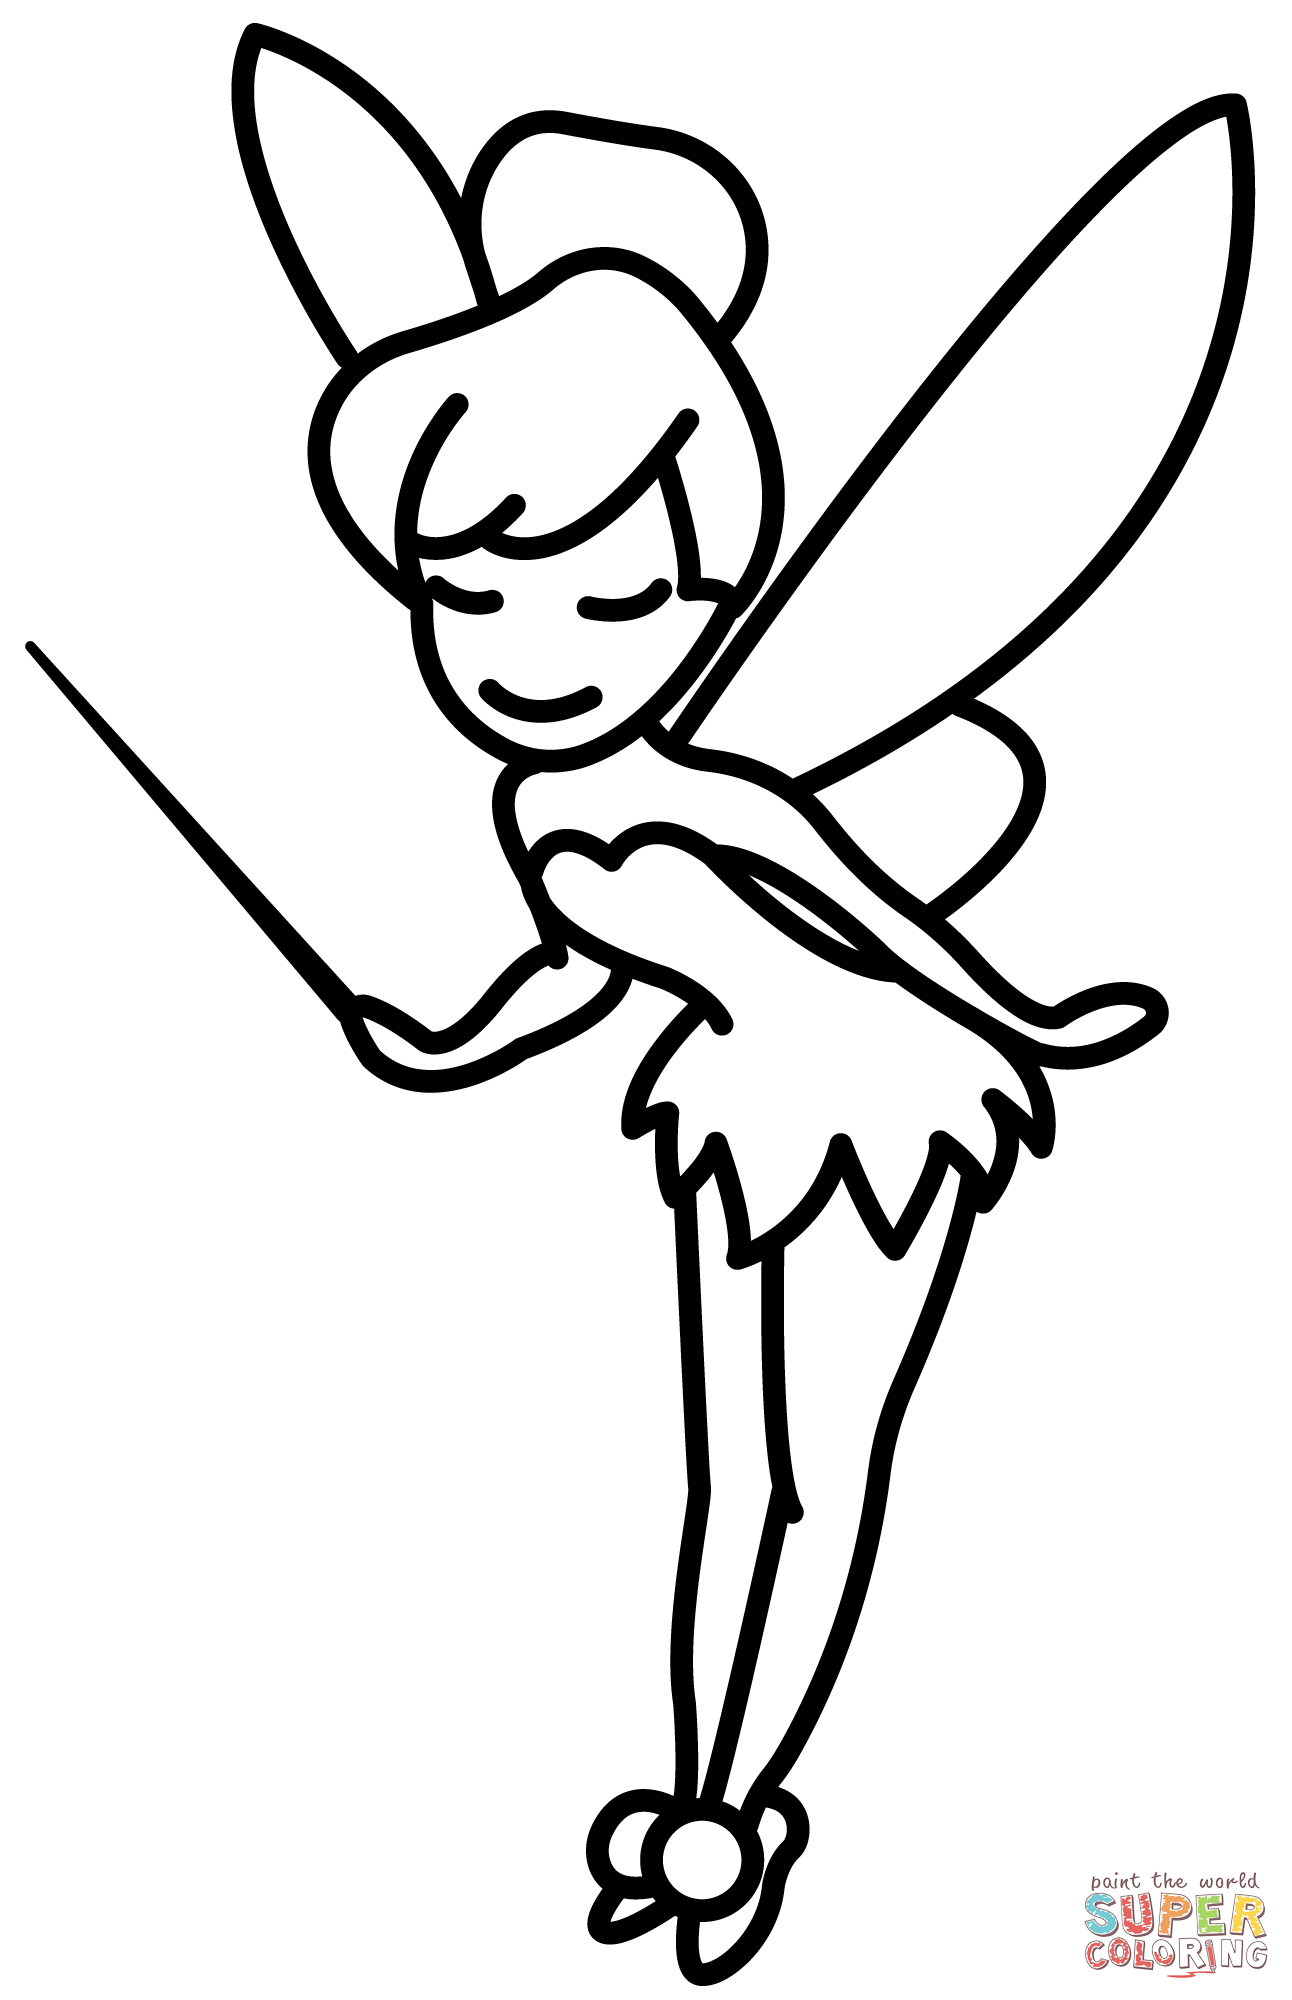 Chibi tinkerbell coloring page free printable coloring pages